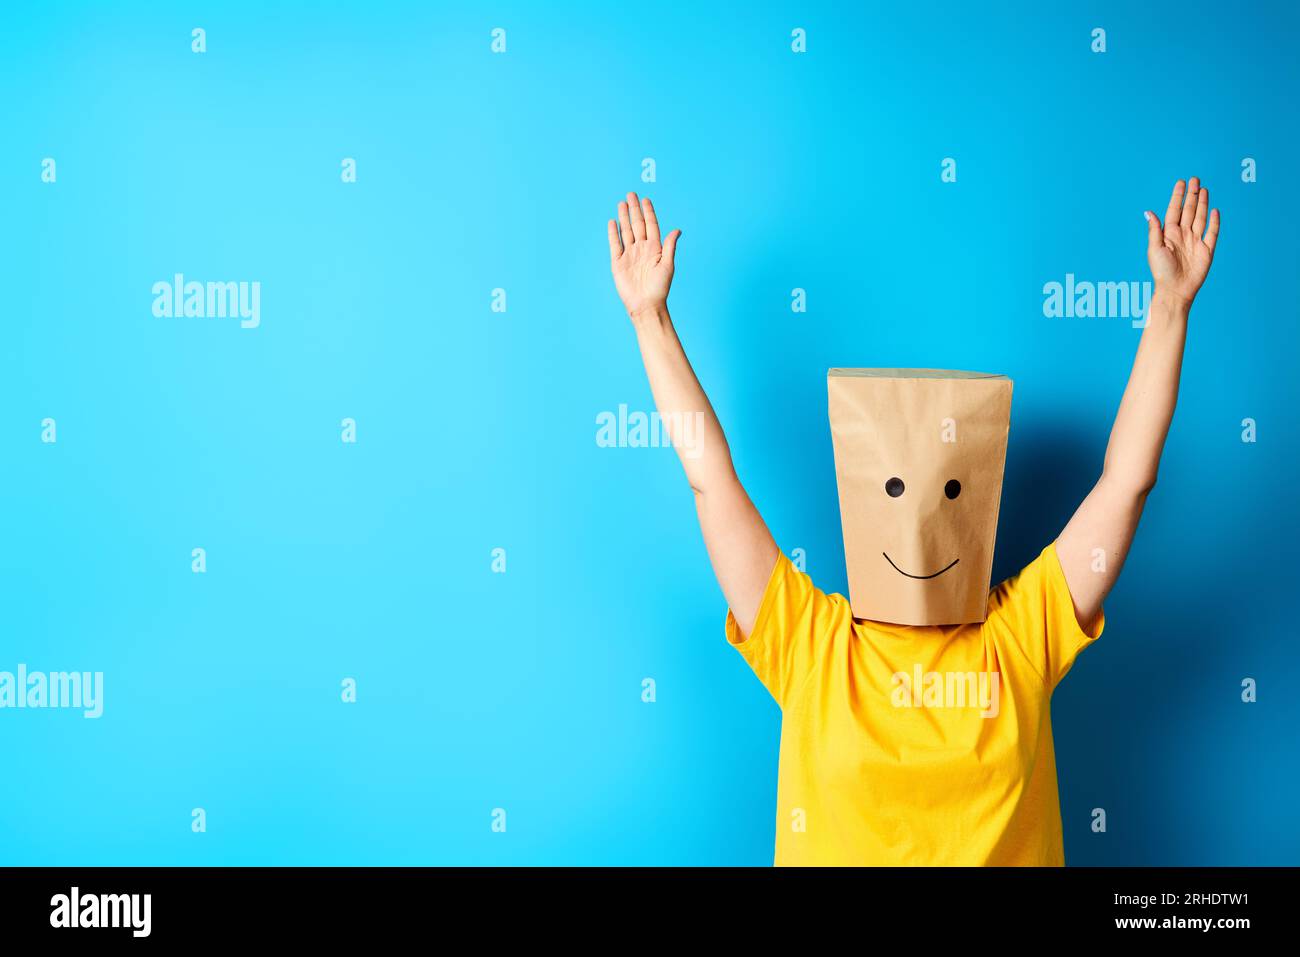 Woman with happy smile on the paper bag on head celebrating success with winner gesture. Copy space. victory, triumph and emotions concept Stock Photo